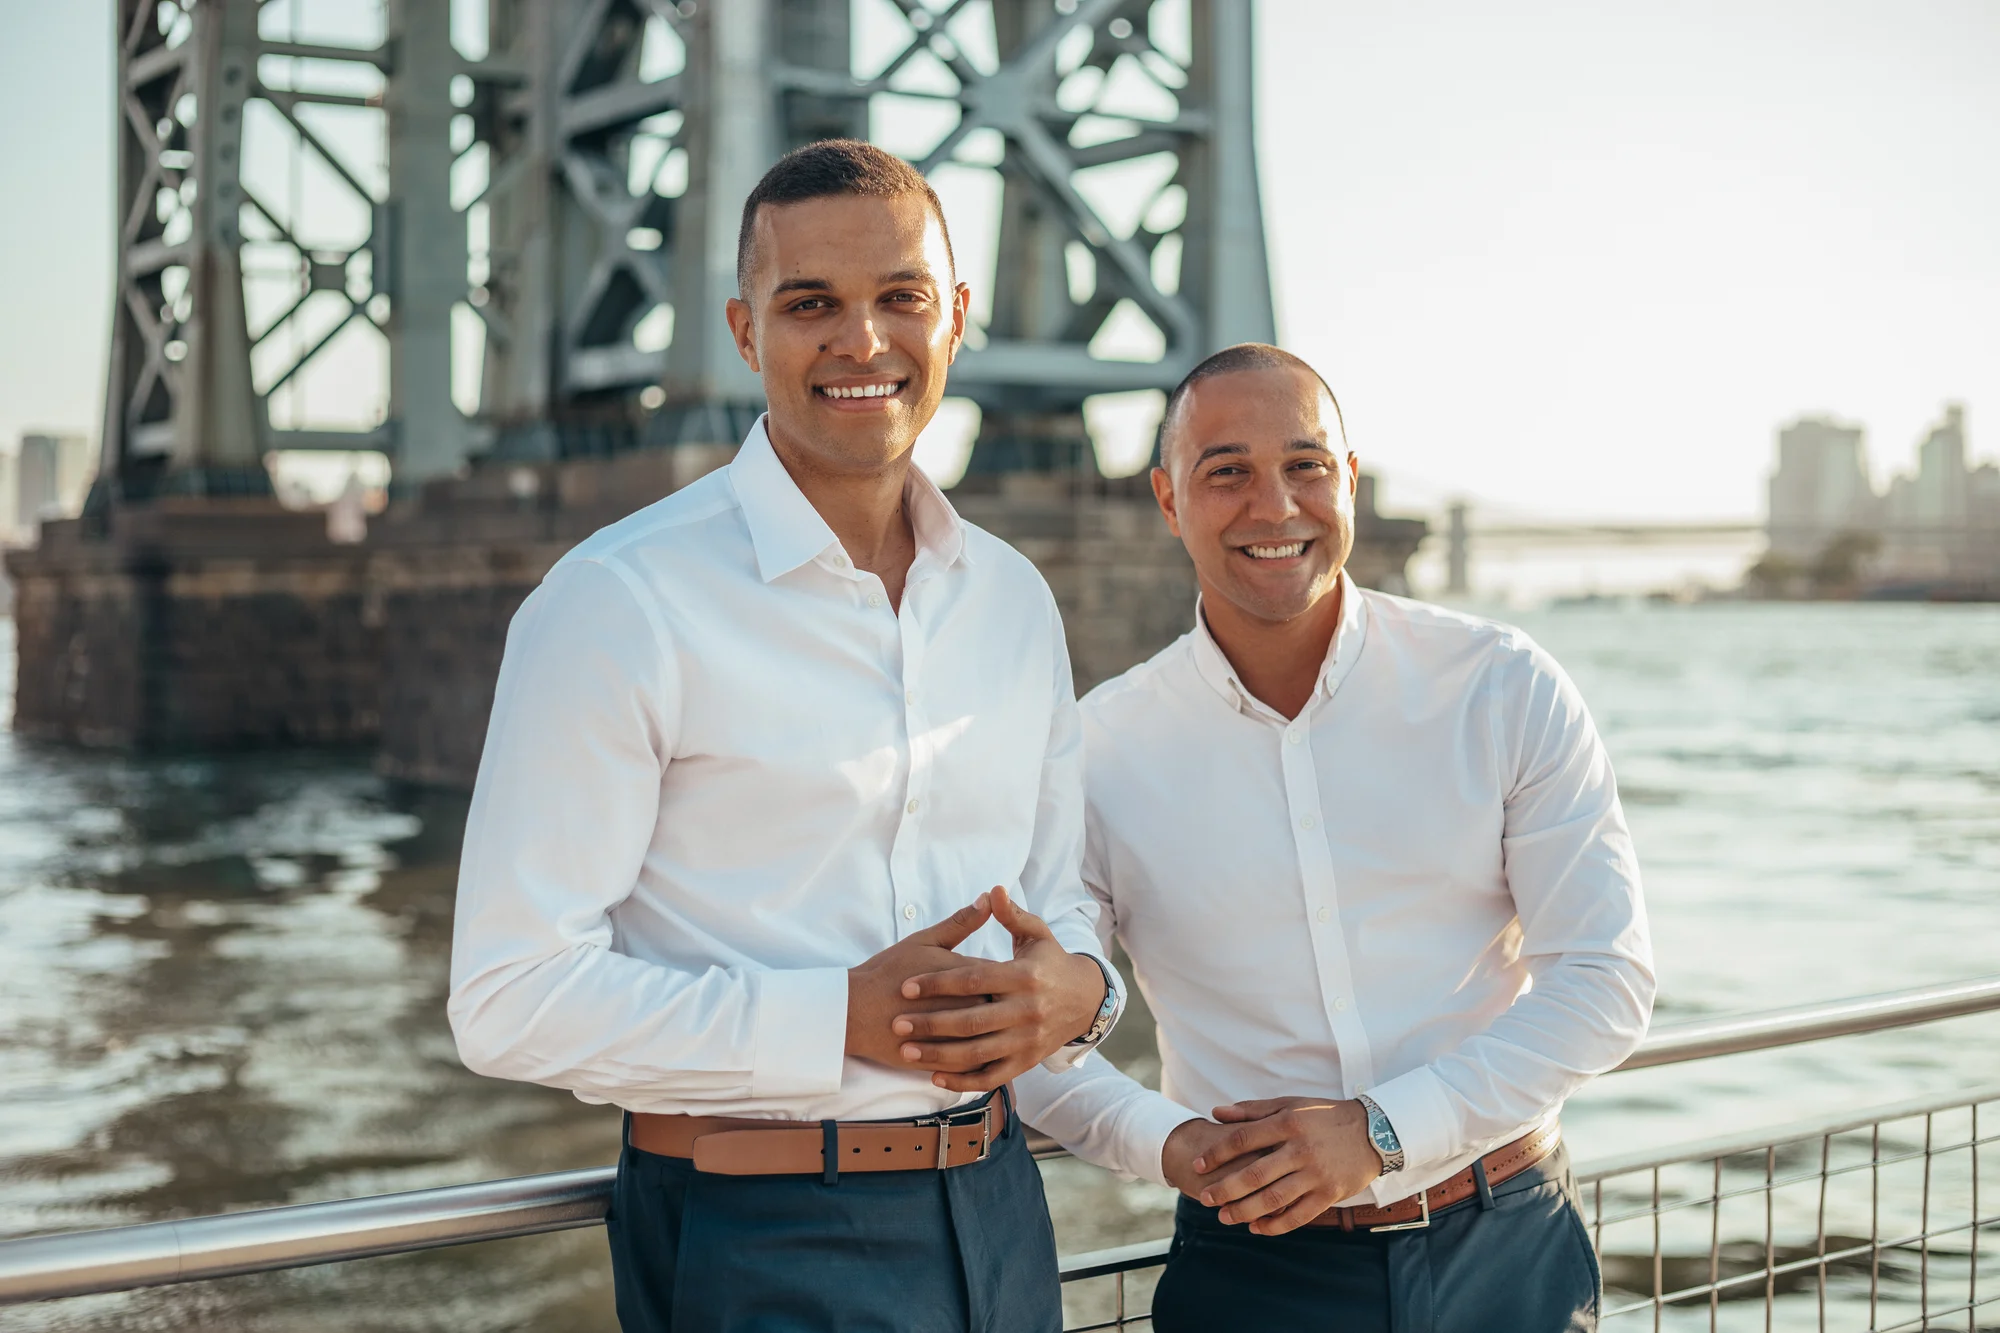 Team photo of Brian Hollins and Aaron Samuels, both wearing long-sleeved white button down shirts, brown belts, and navy slacks.  They are standing in front of a river.